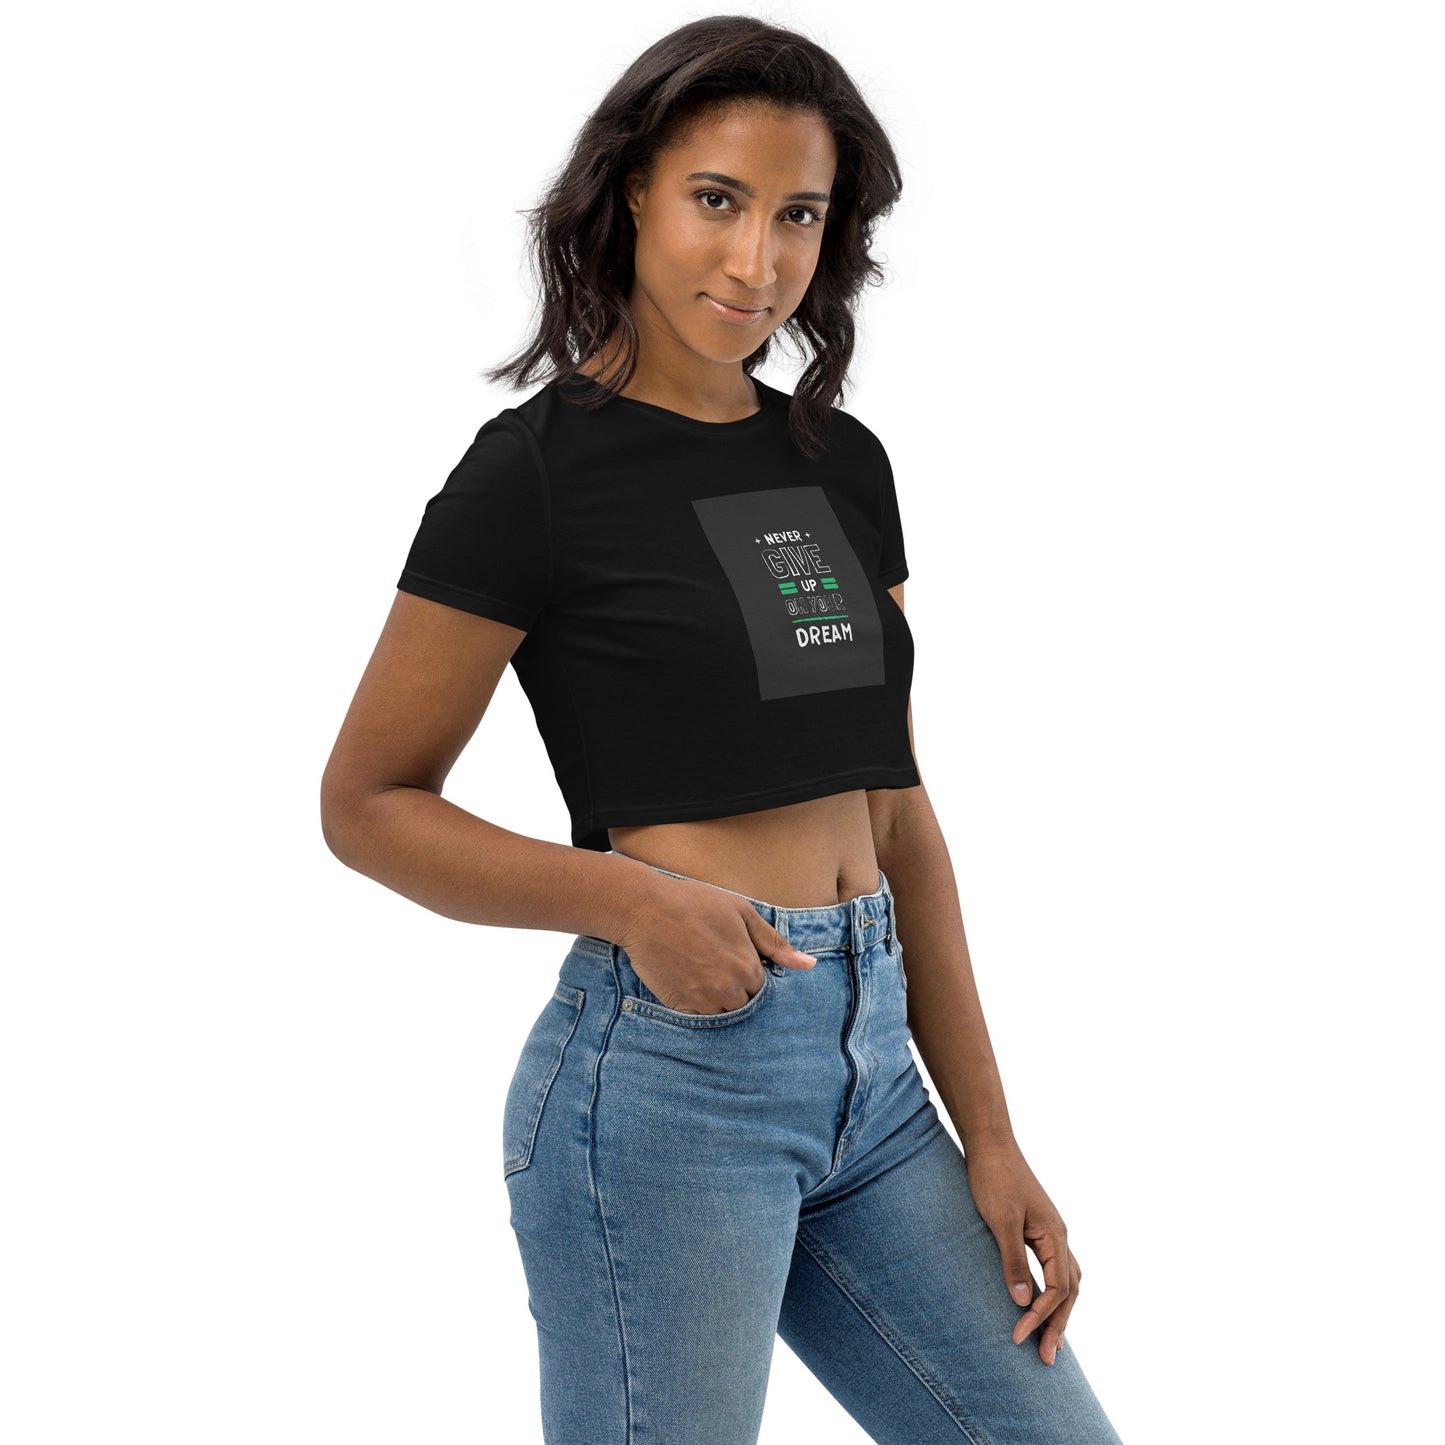 NEVER GIVE UP WOMEN'S Organic Crop Top